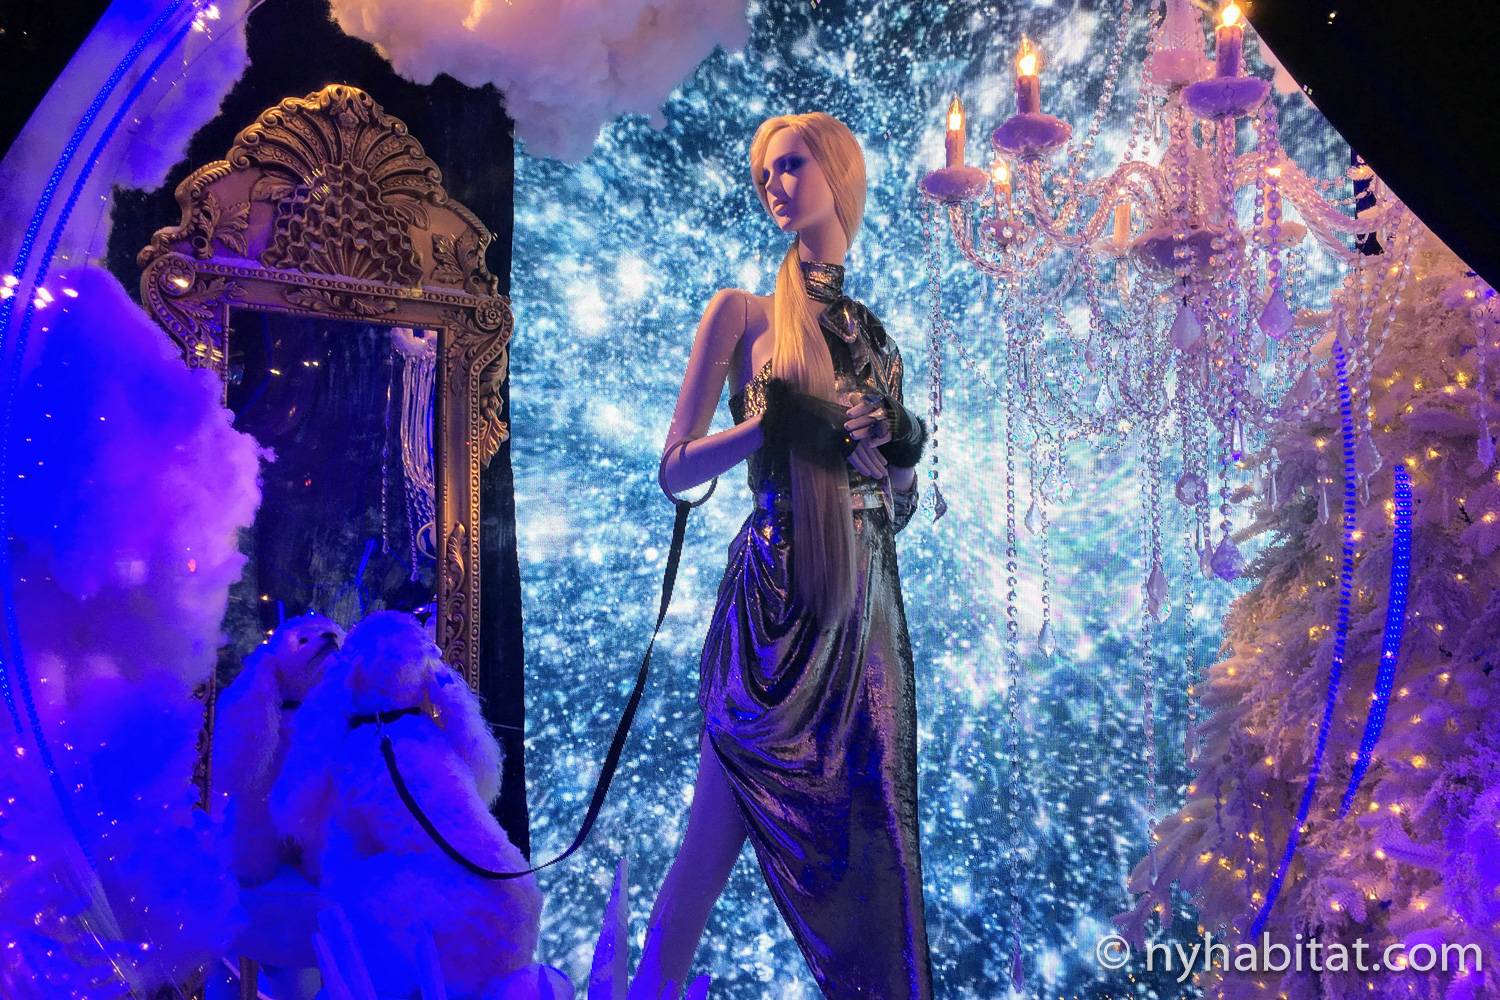 7 Dazzling Holiday Windows in NYC - Page 6 of 7 - Untapped New York